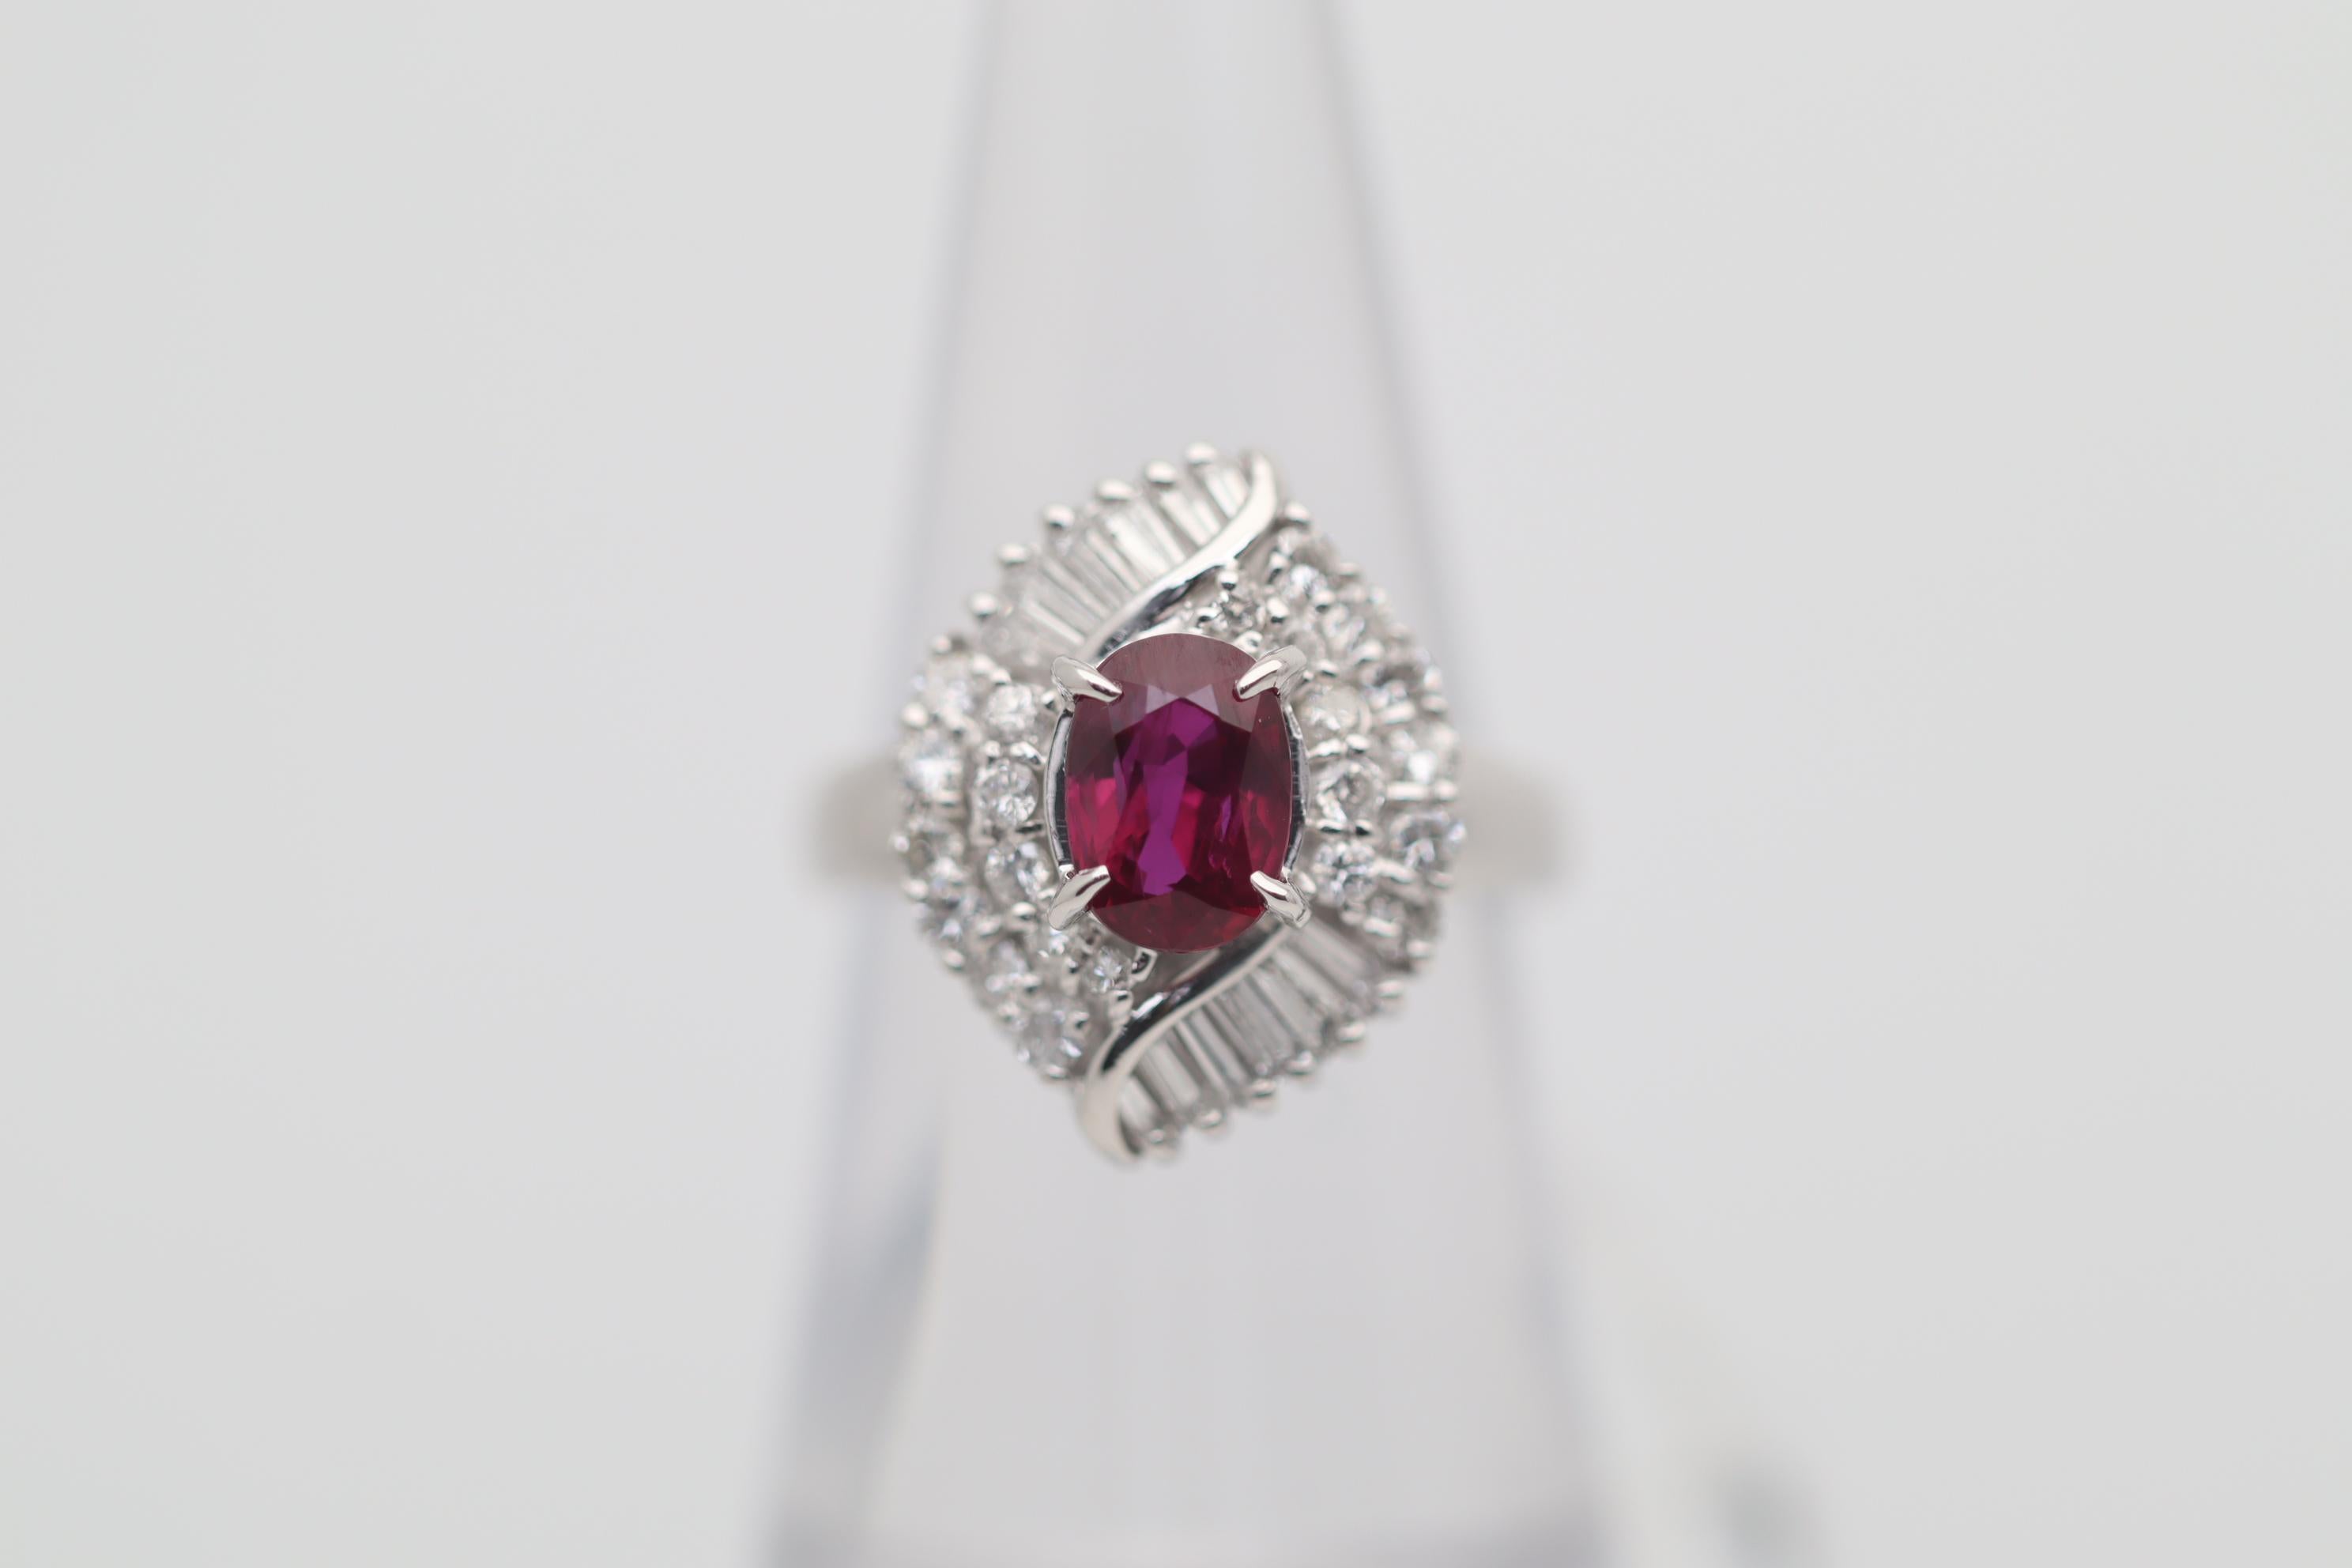 A sweet and fine platinum ring featuring a 1.43 carat ruby with a rich gem vivid red color. It has a lovely oval-shape that is just so pleasing to gaze into. It is complemented by 0.78 carats of round brilliant and baguette-cut diamonds set around